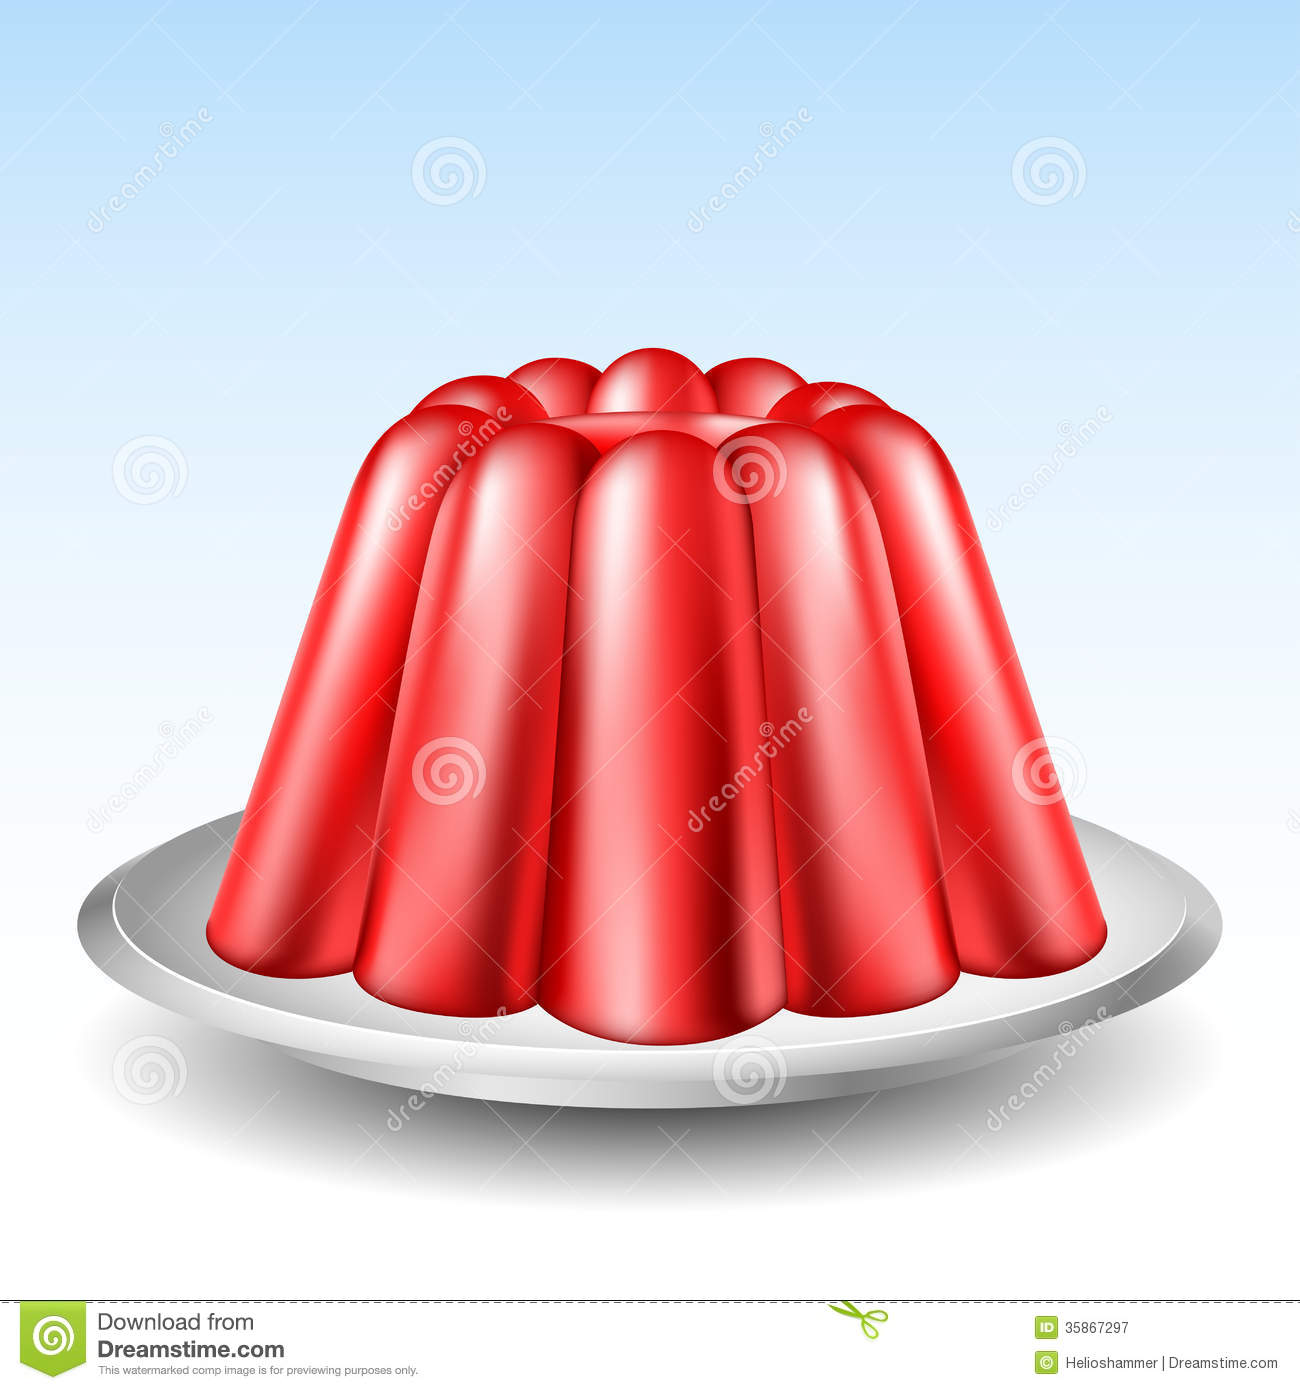 clipart pictures of jelly - photo #22